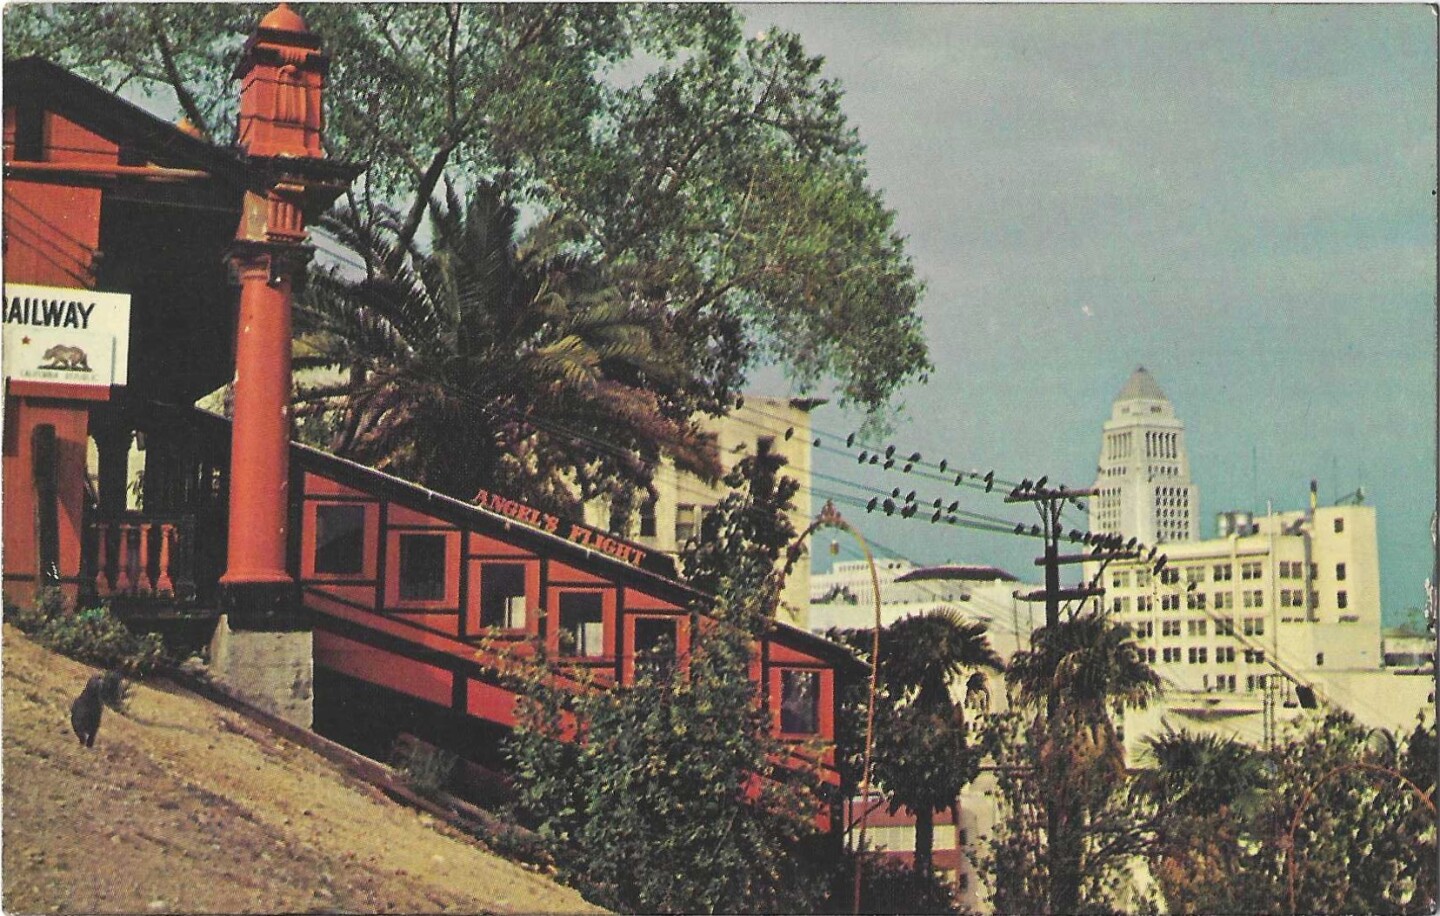 A postcard from the 1960s shows Angels Flight in operation with City Hall in the background.